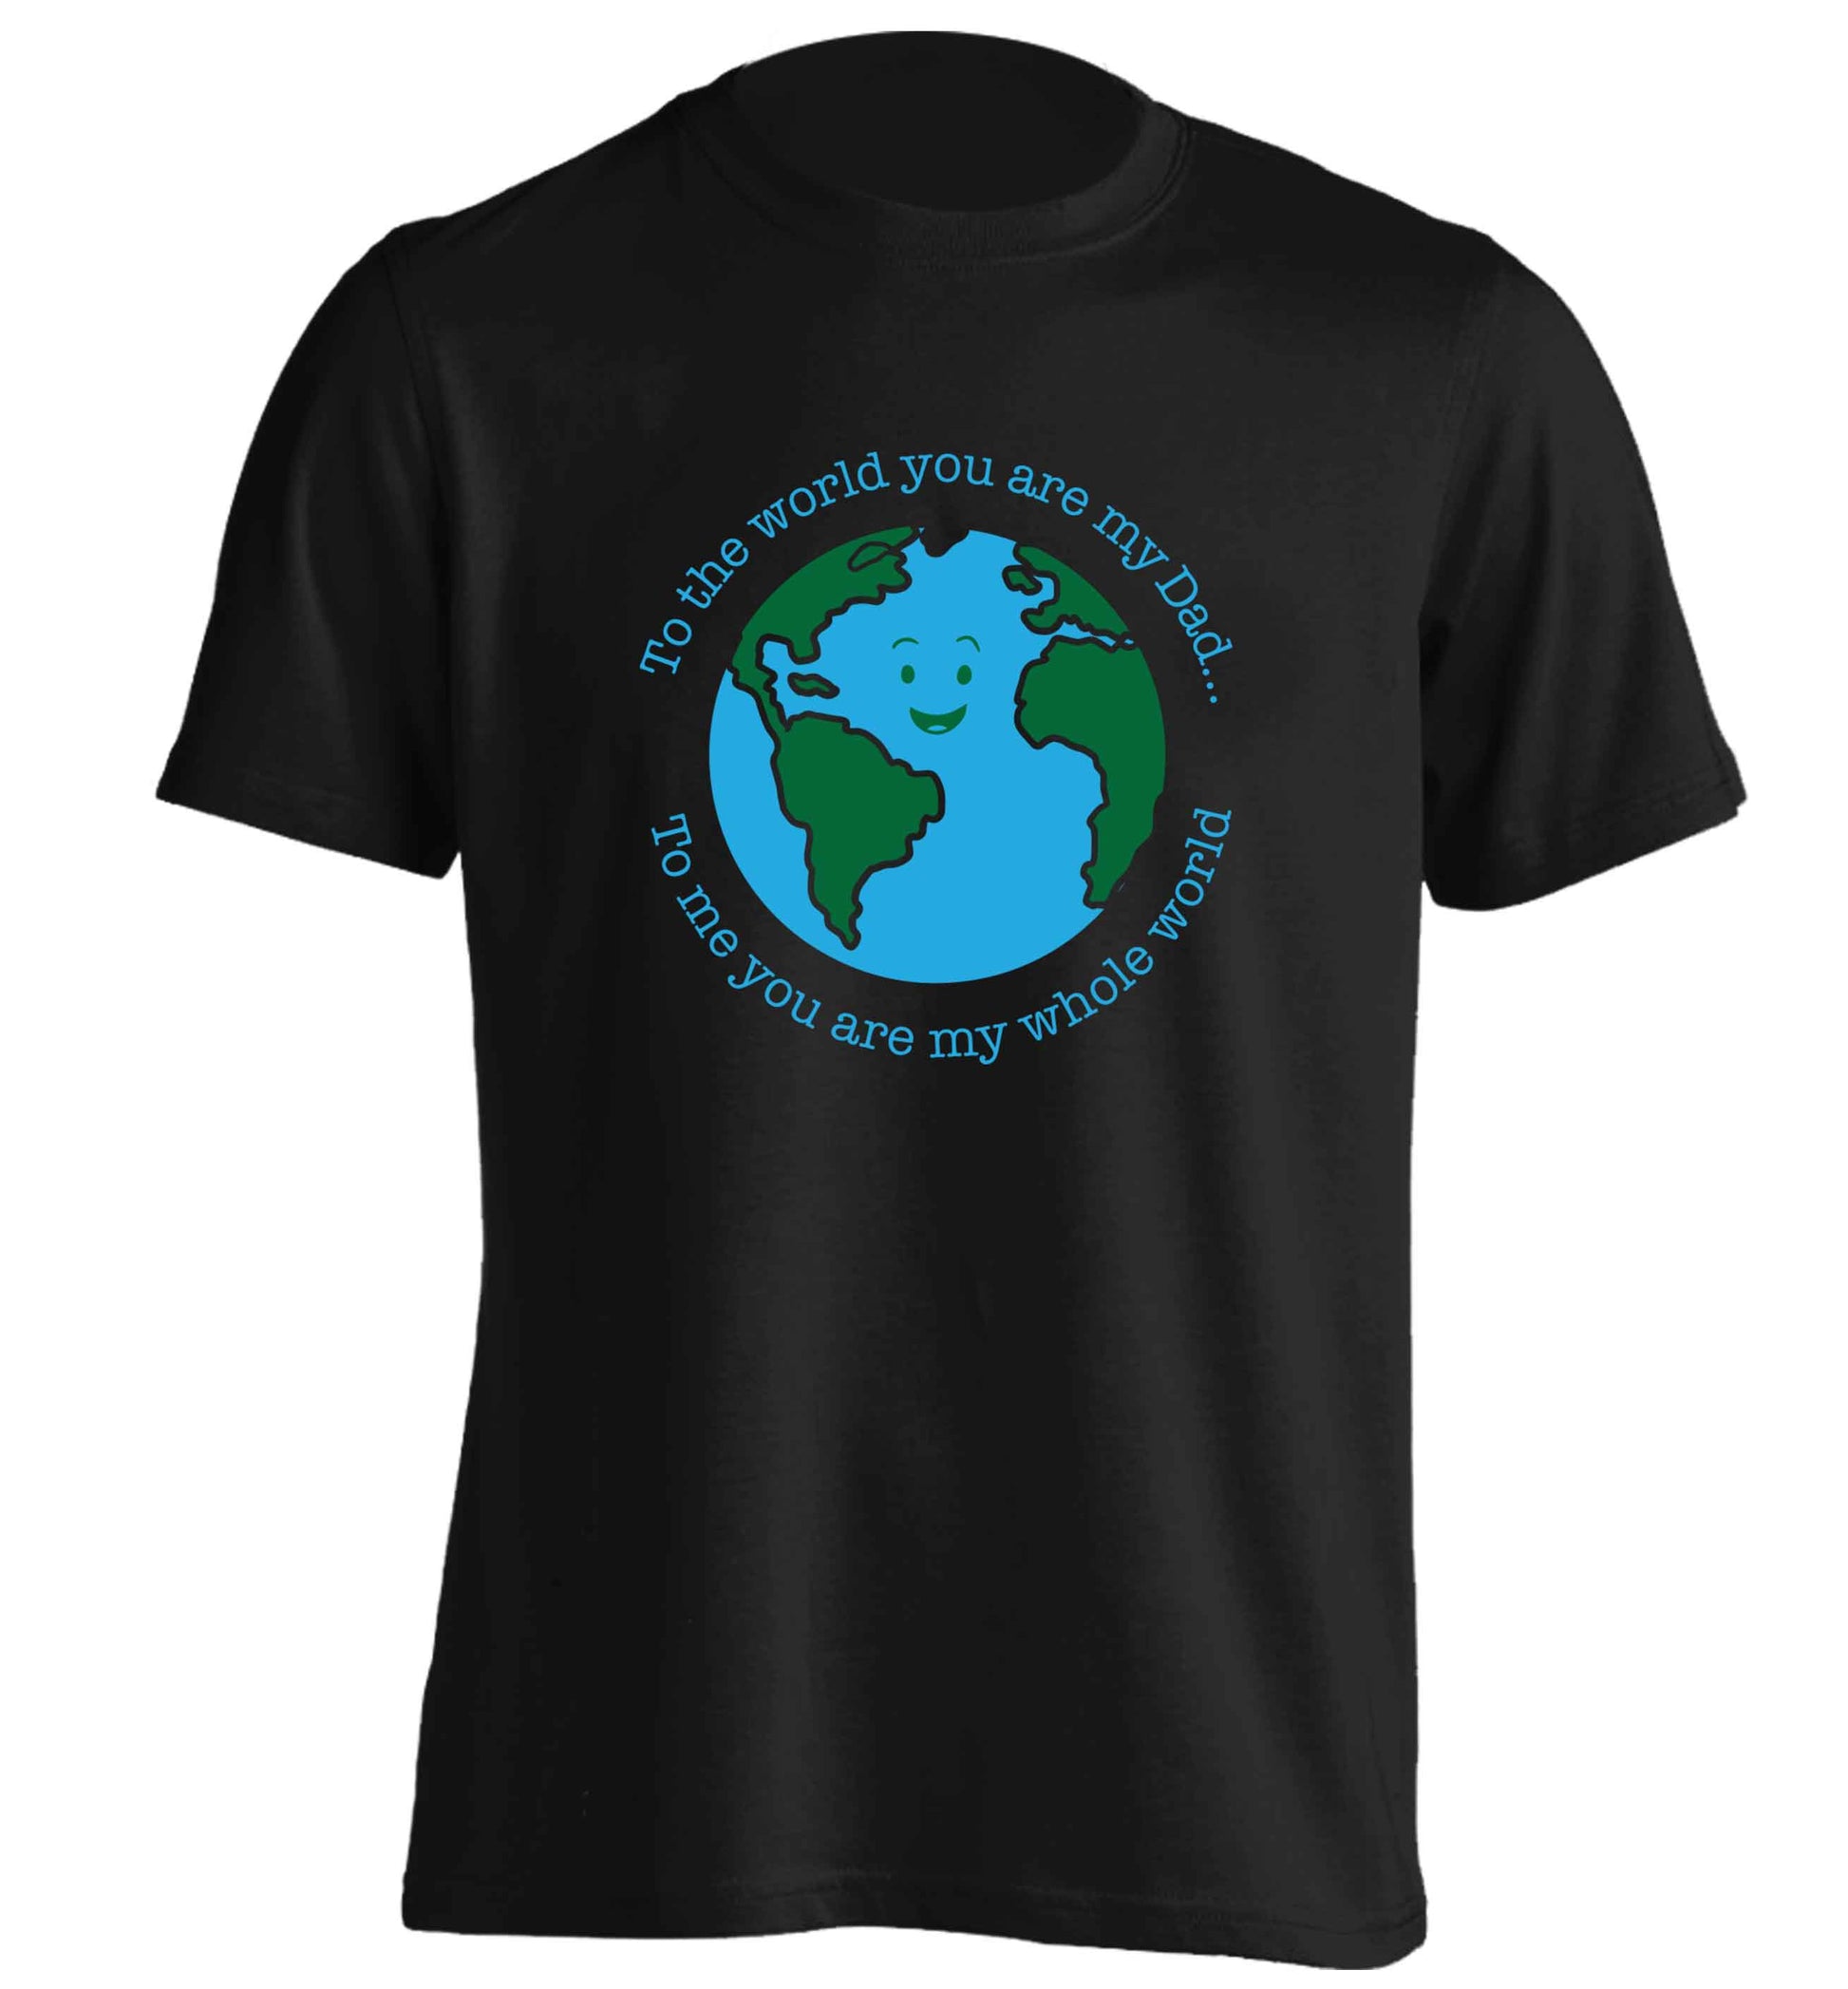 To the world you are my dad, to me you are my whole world adults unisex black Tshirt 2XL